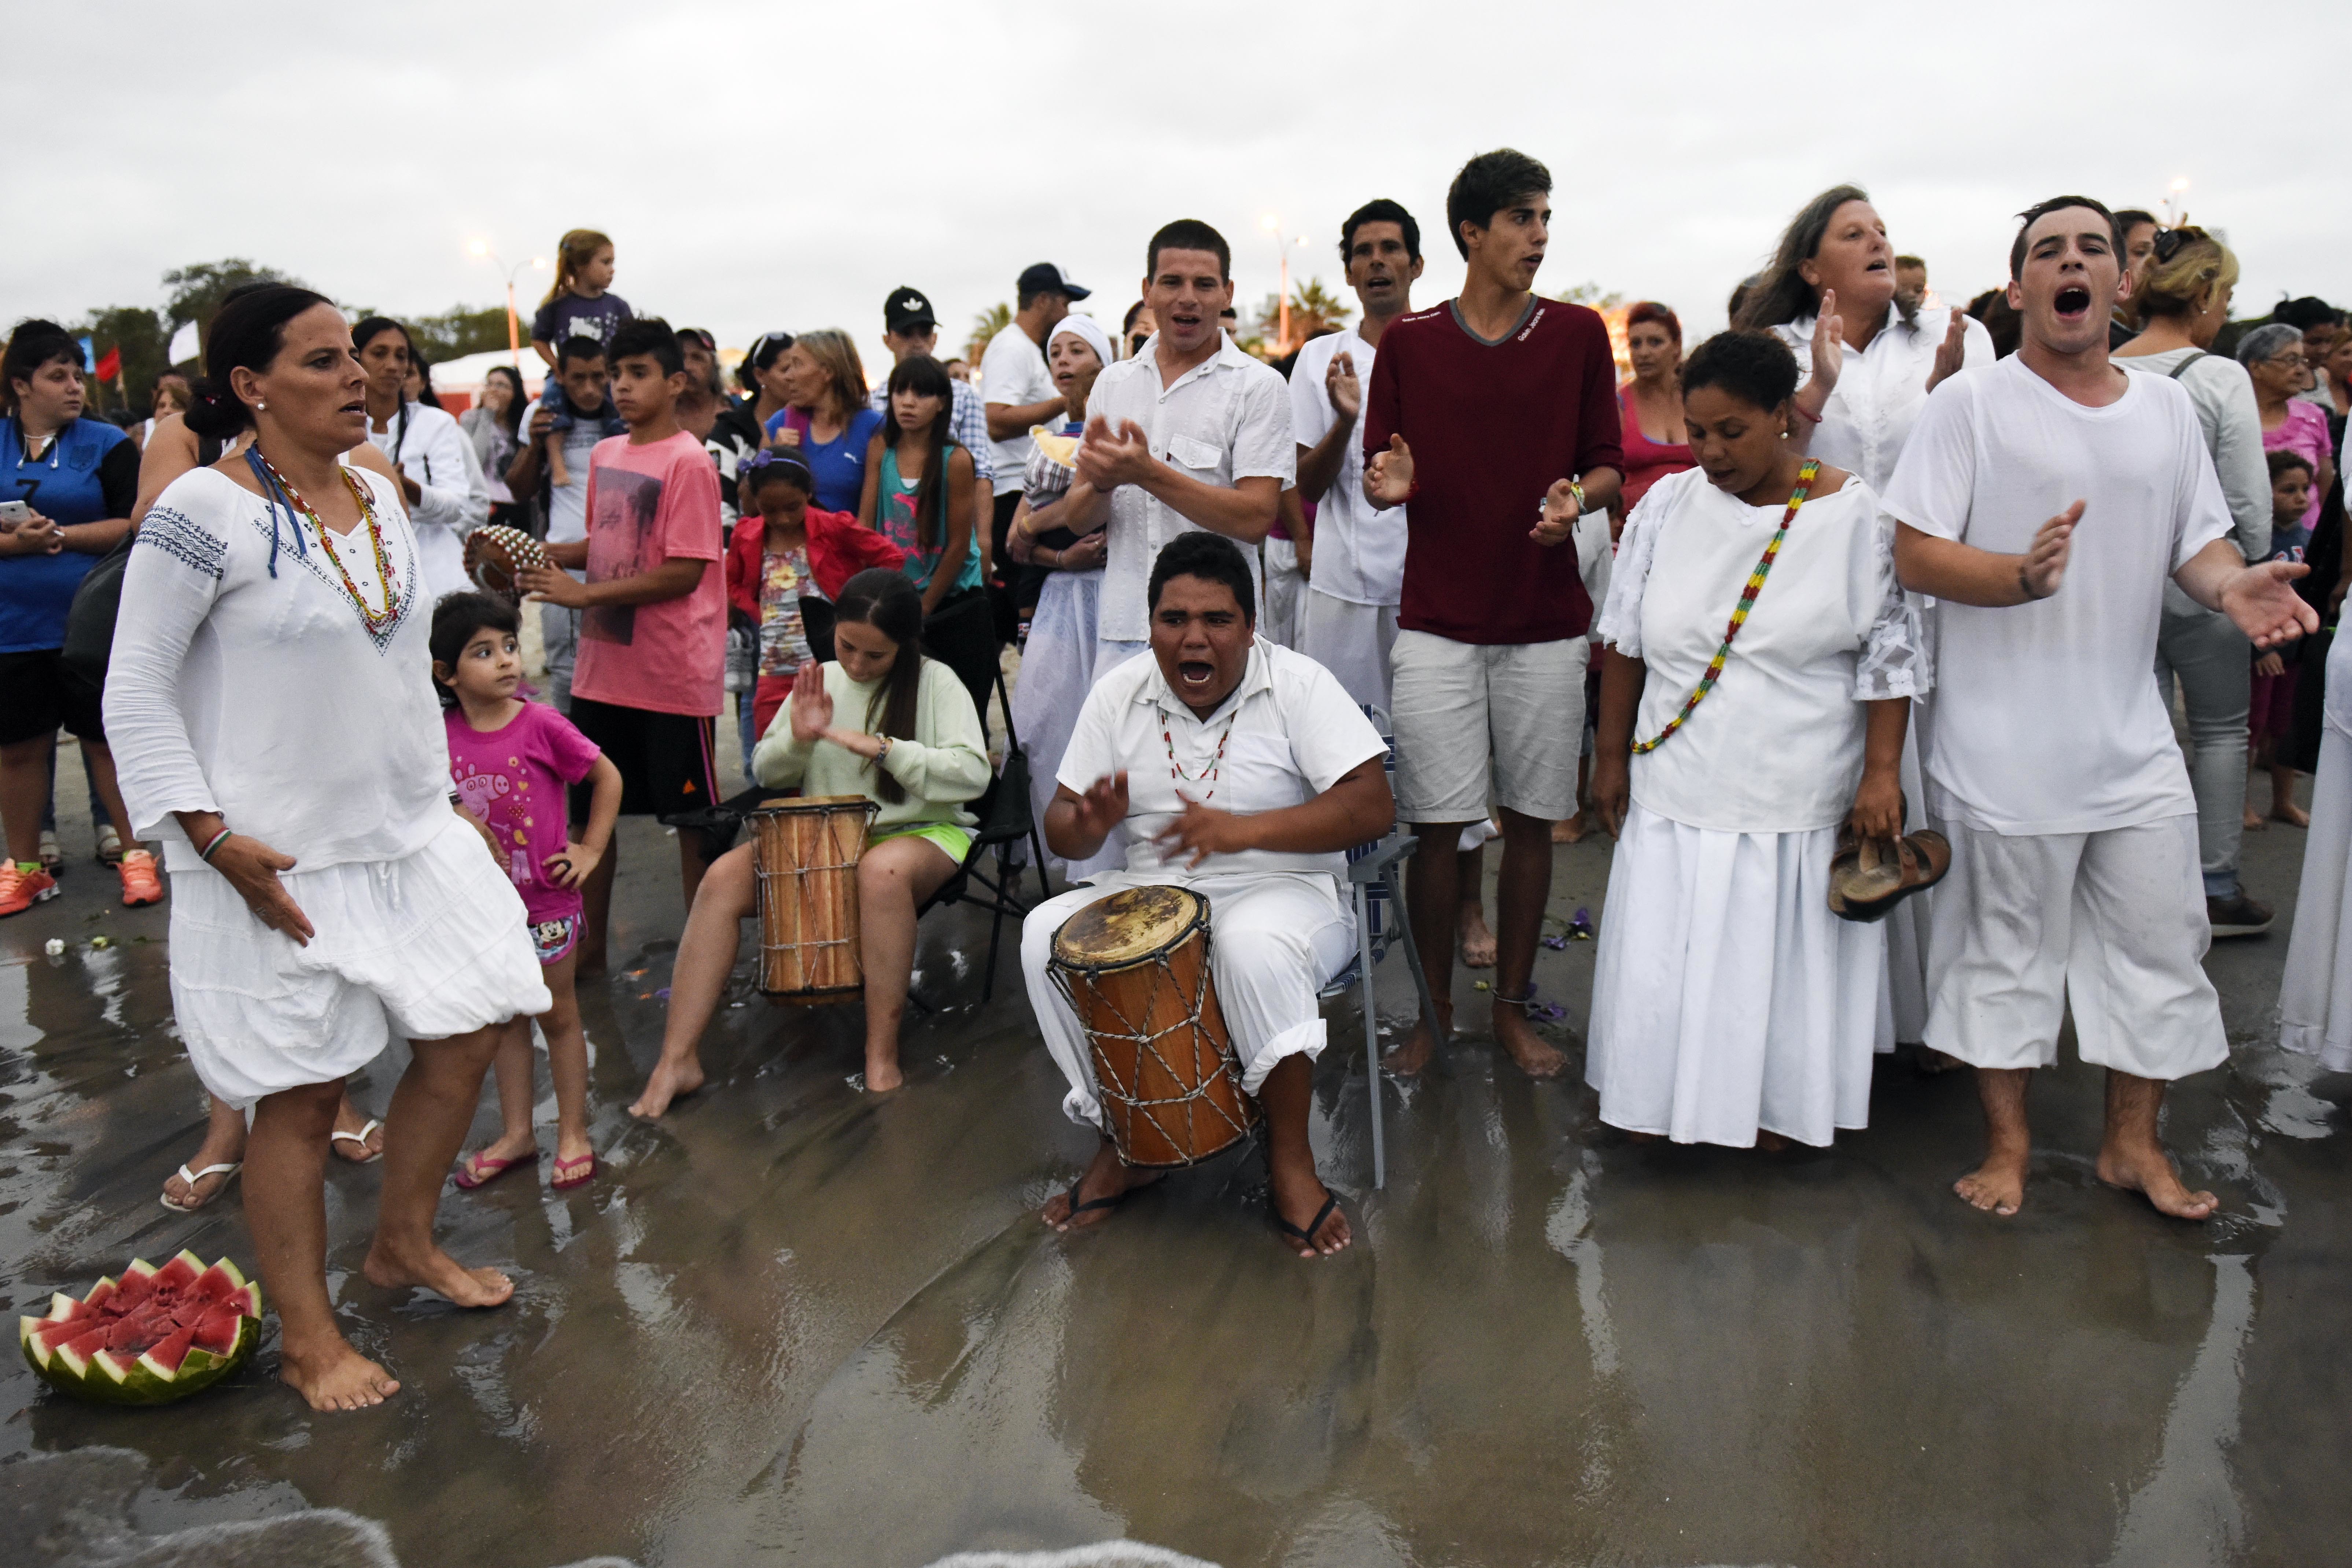 Worshippers sing to honor the African sea goddess Yemanja, at the sea shore in Montevideo, Uruguay, Thursday, Feb. 2, 2017. Thousands of worshippers come to the beach on Yemanja's feast day, bearing candles, flowers, perfumes and fruit to show their gratitude for her blessings. The celebration coincides with the Roman Catholic feast day of the Virgin of Candelaria, marked Feb. 2. (AP Photo/Matilde Campodonico)